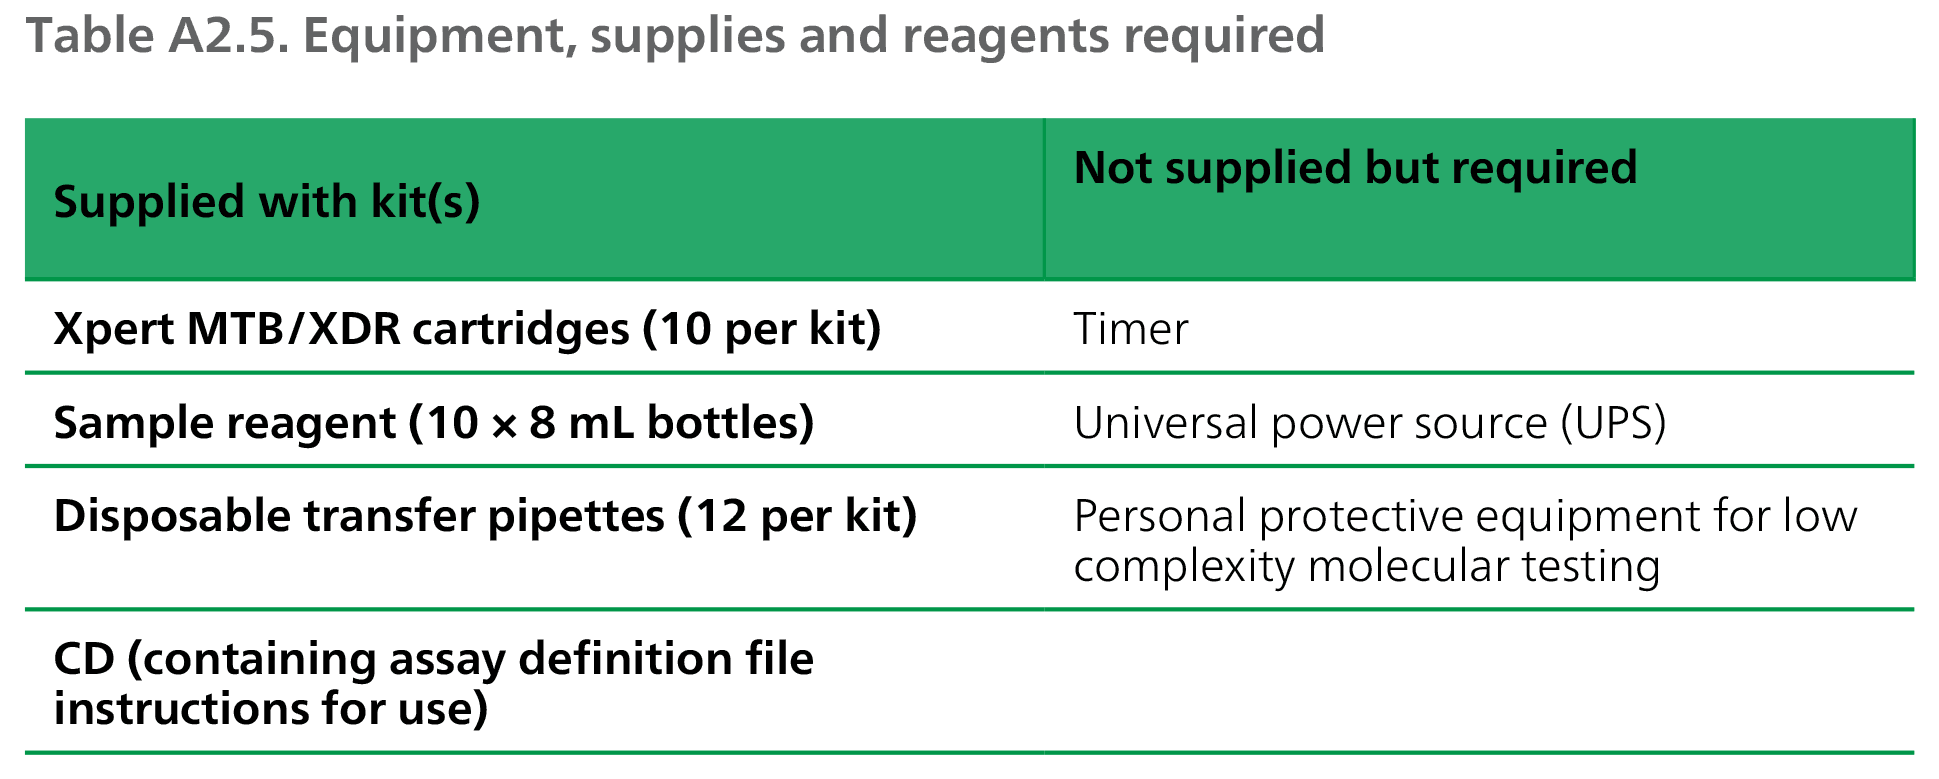 Equipment, supplies and reagents required